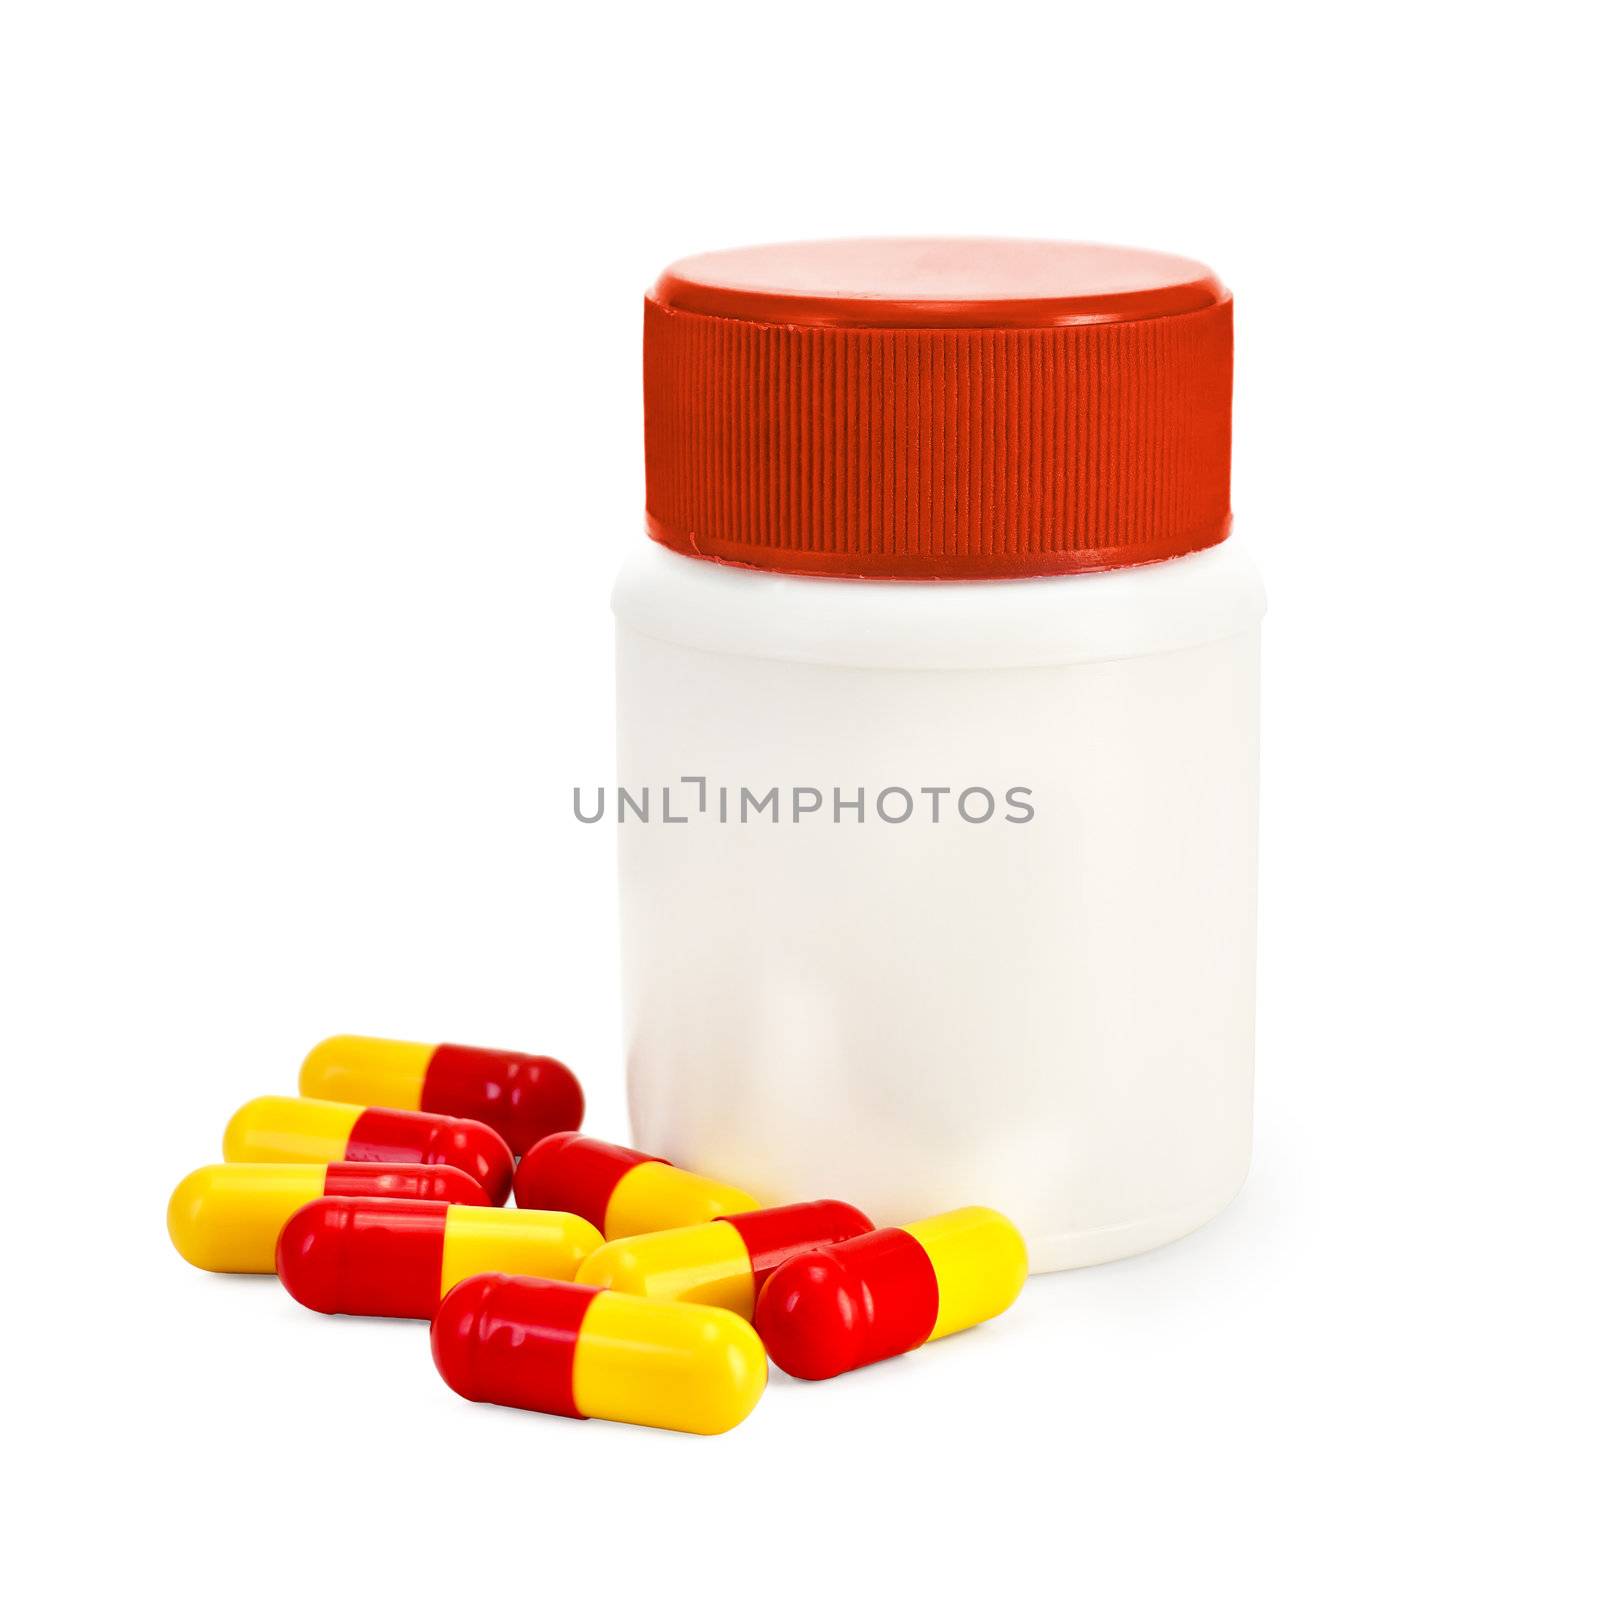 Capsule red and yellow, a jar with red cap isolated on white background